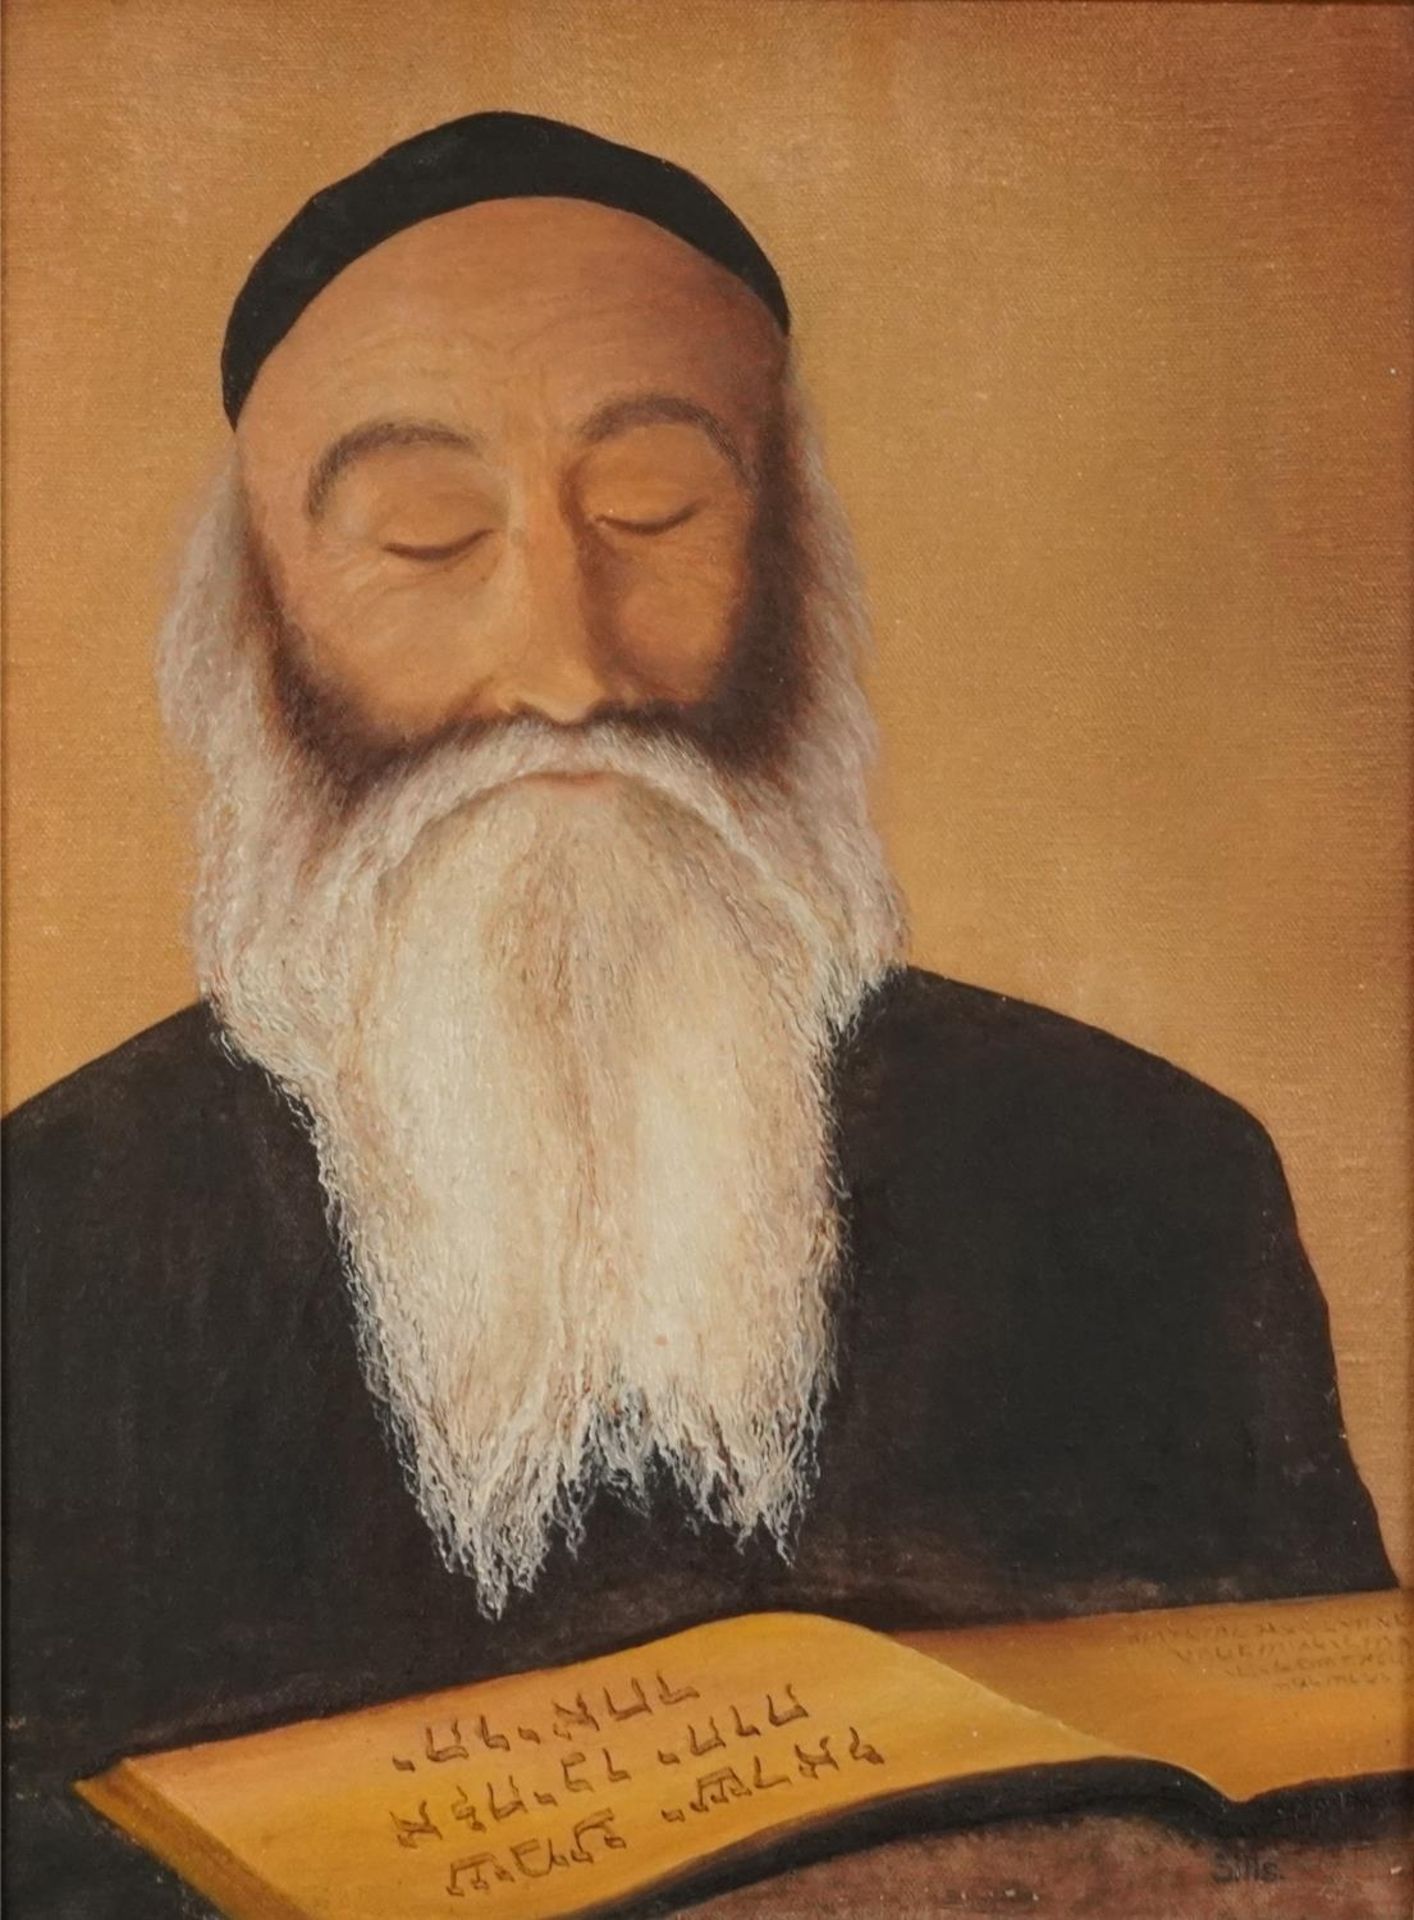 Sills - Portrait of a Rabbi with Siddur, Jewish oil on canvas, inscribed Here Oh Israel, The Lord is